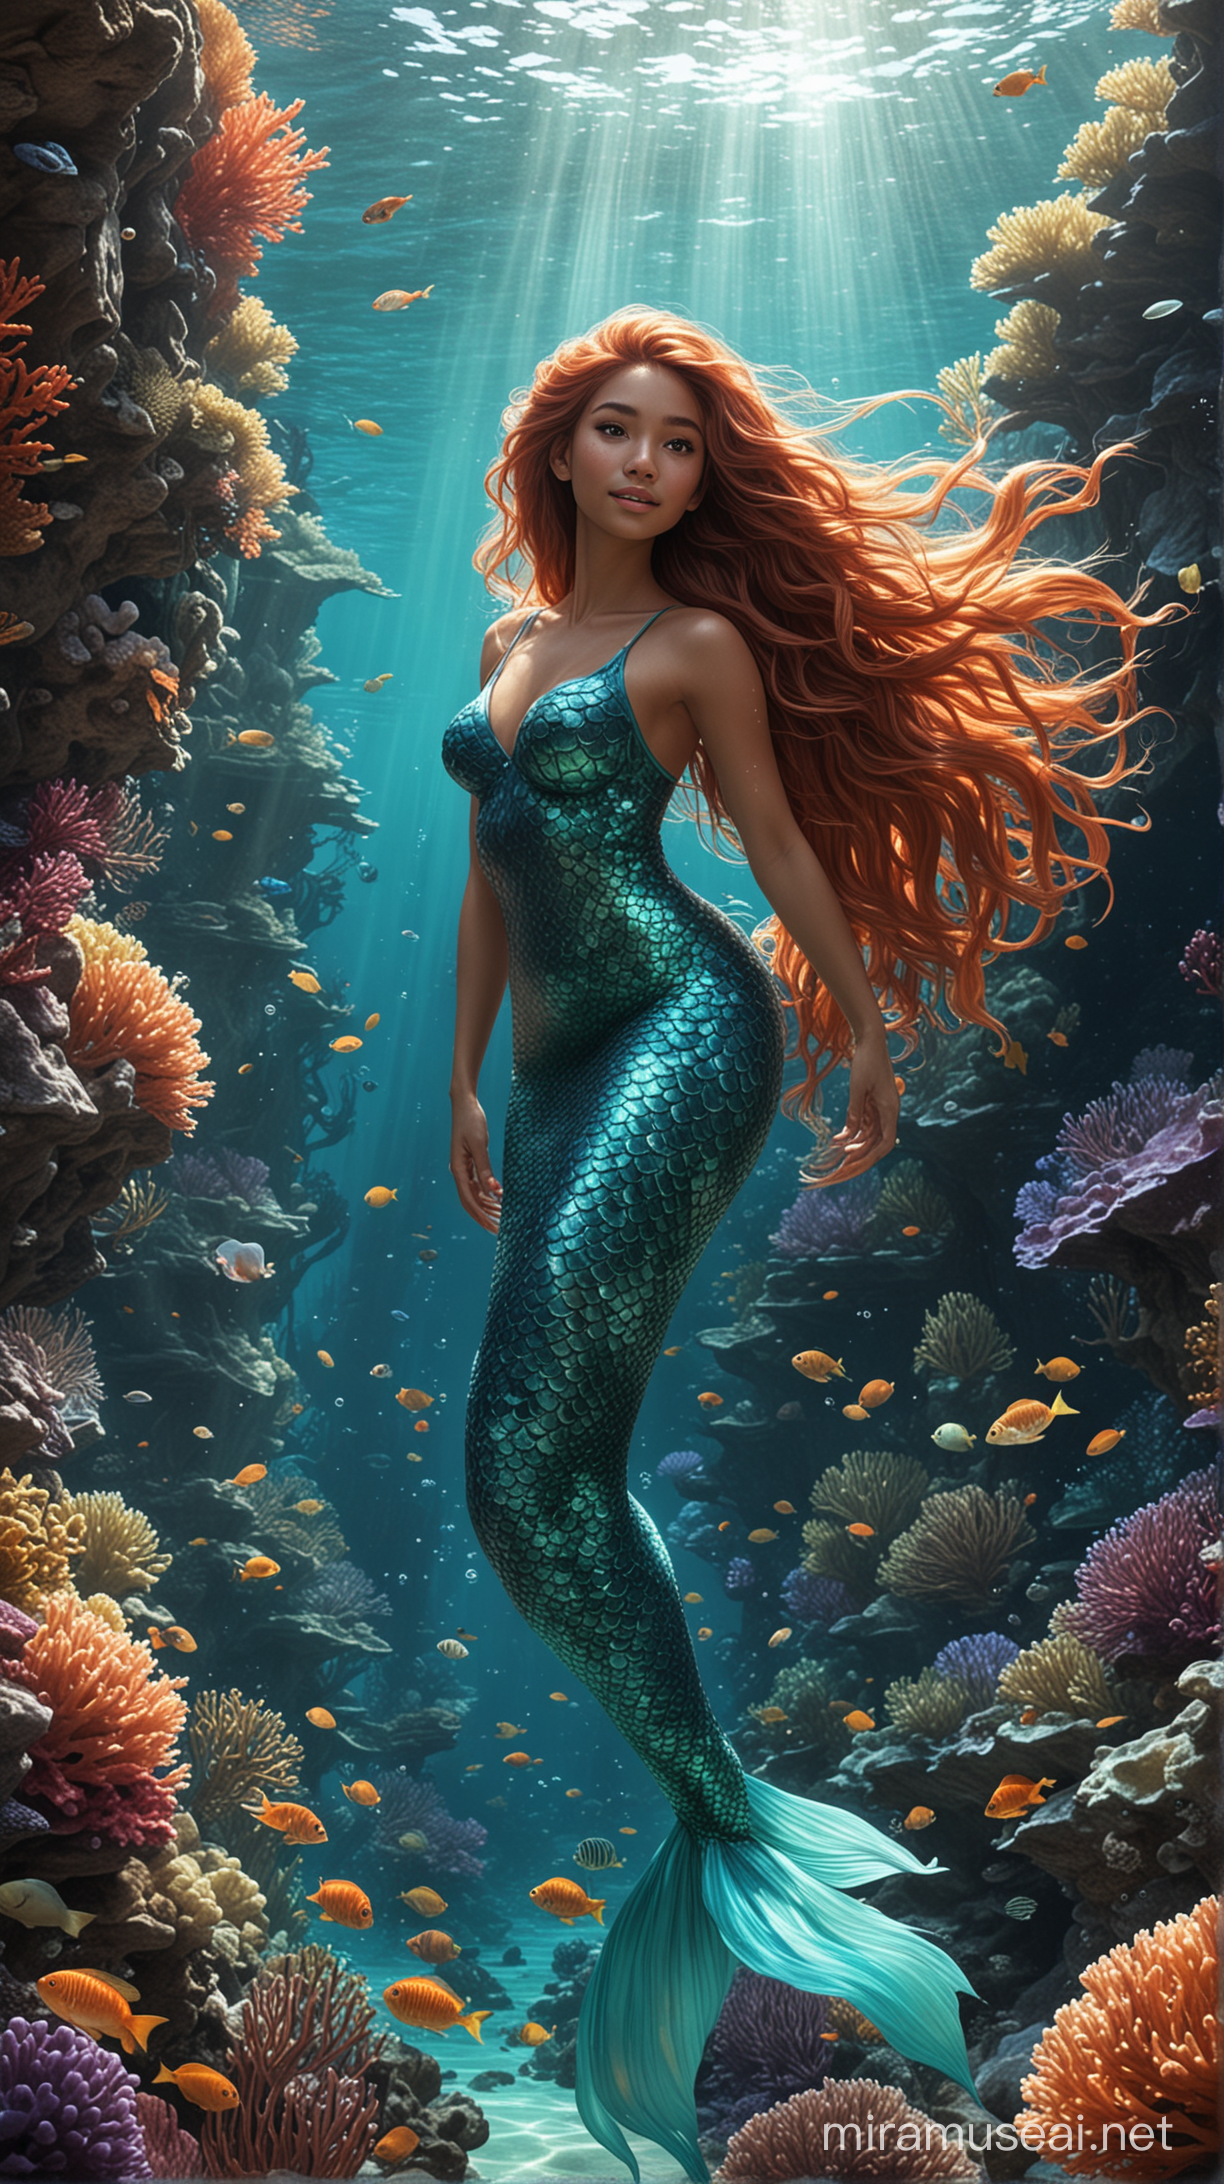 Mai, the mermaid, gracefully gliding among the coral reefs, her long and flowing hair swaying with the currents.